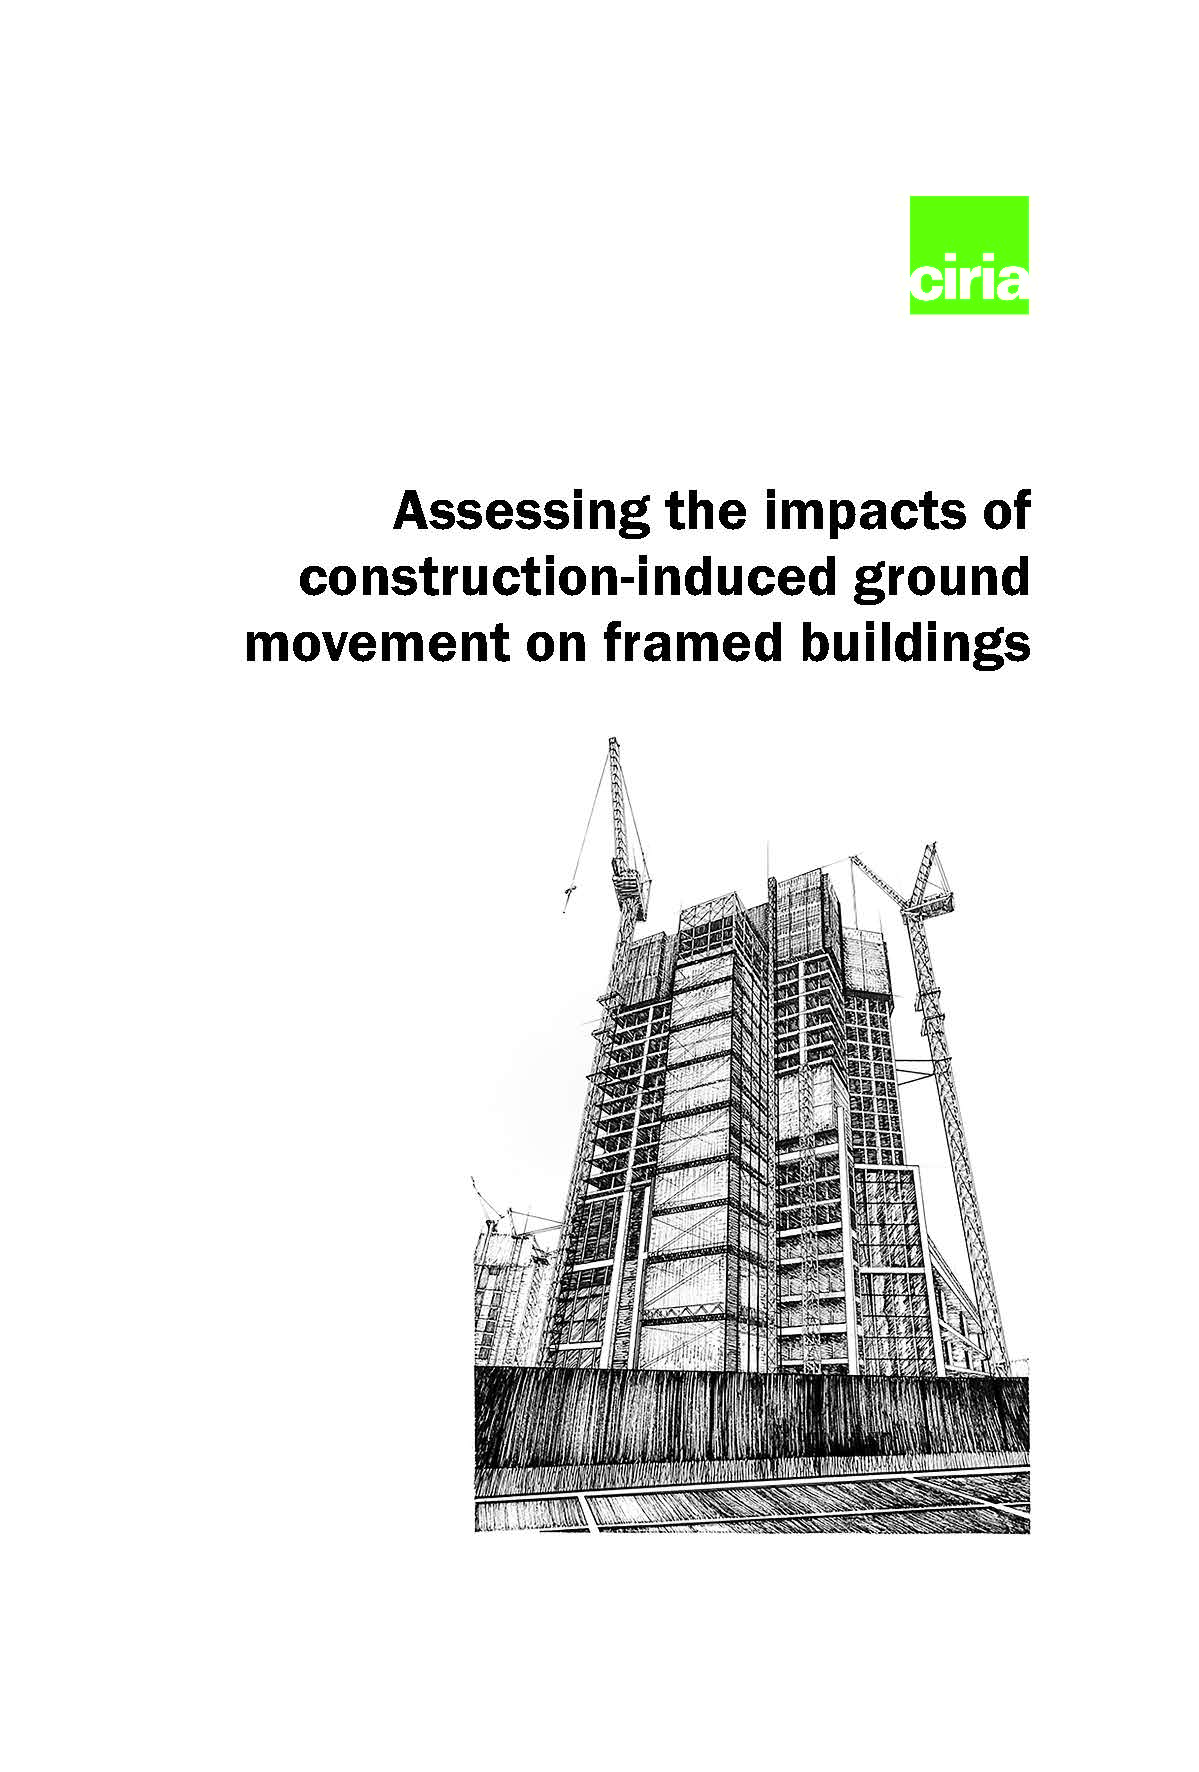 Assessing the impacts of construction-induced ground